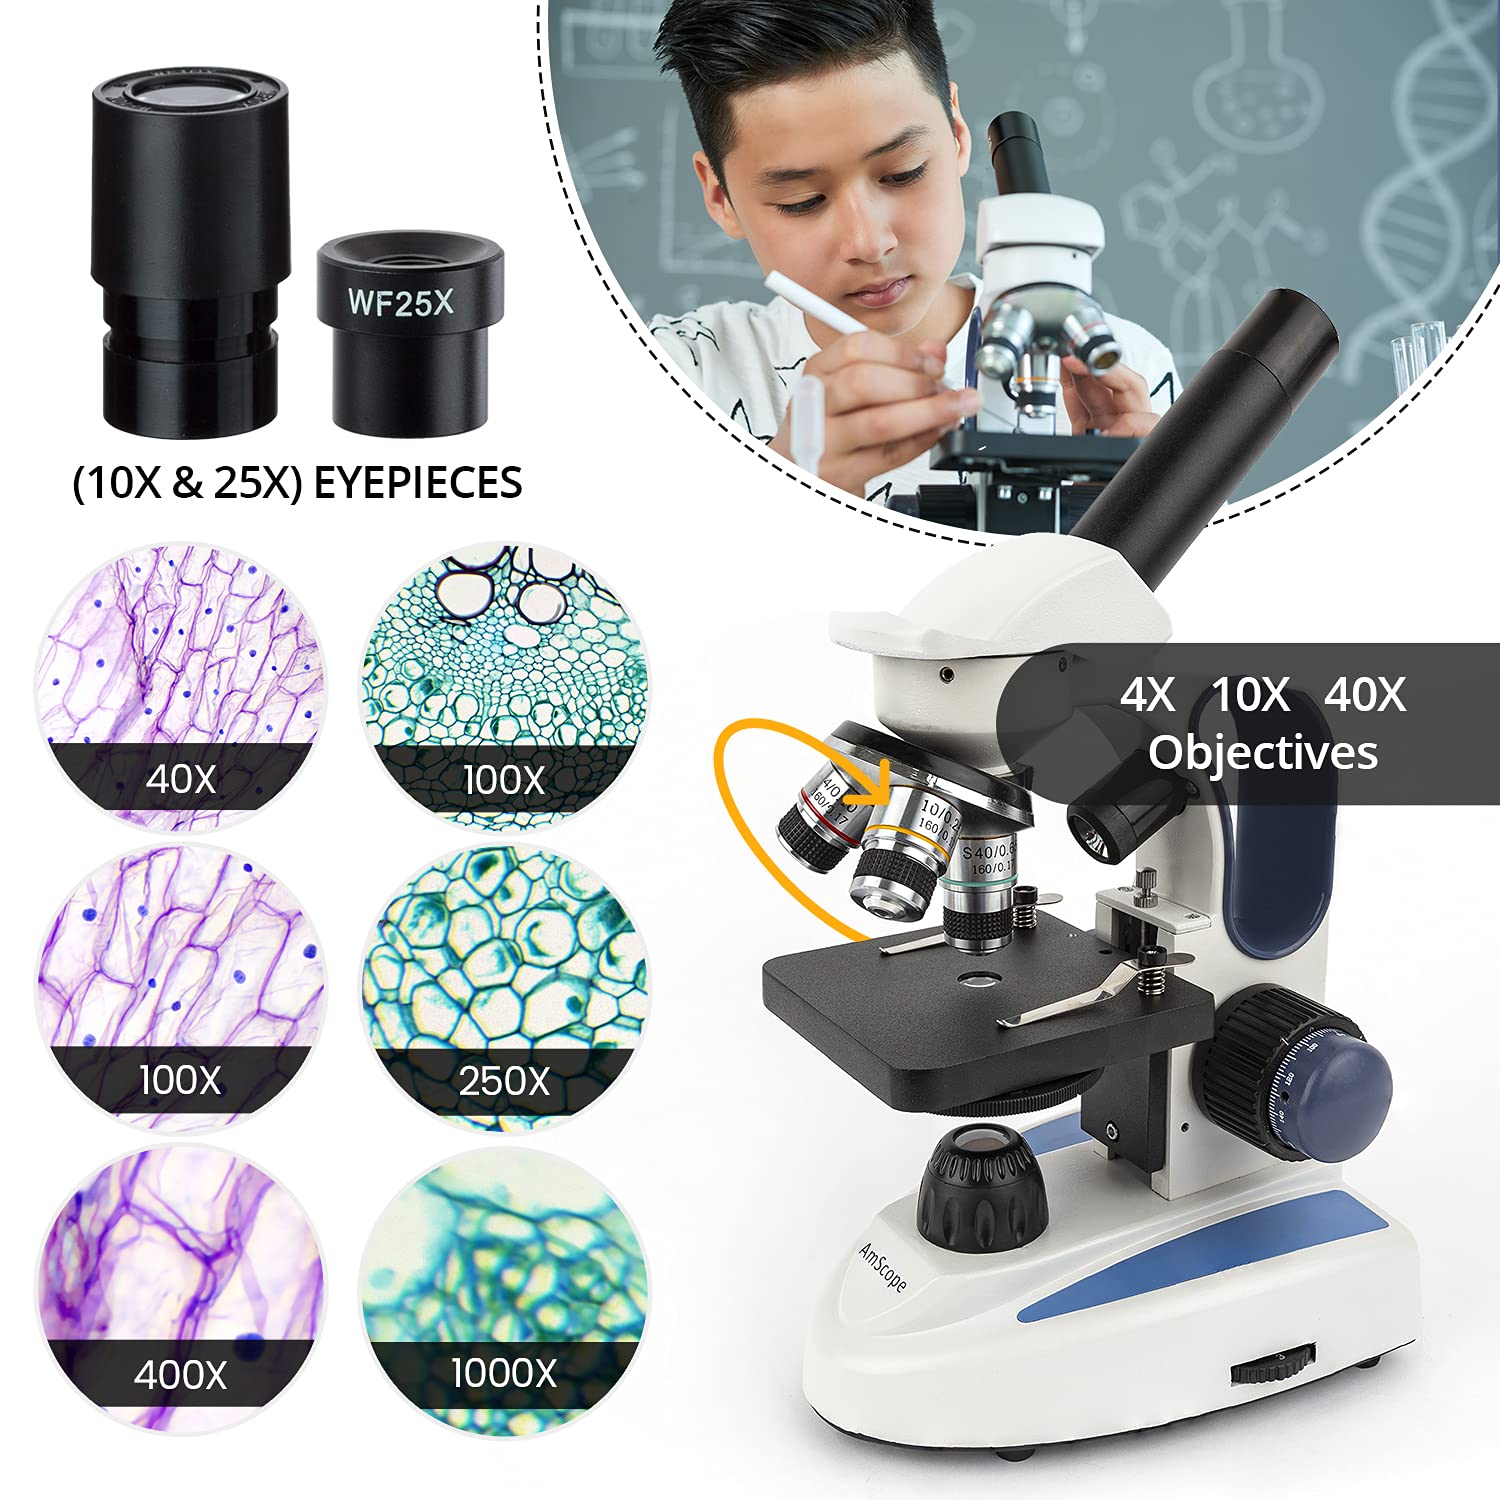 AmScope M158C-E Compound Monocular Microscope, WF10x and WF25x Eyepieces, 40x-1000x Magnification, Brightfield, LED Illumination, Plain Stage, 110V, Includes 0.3MP Camera and Software